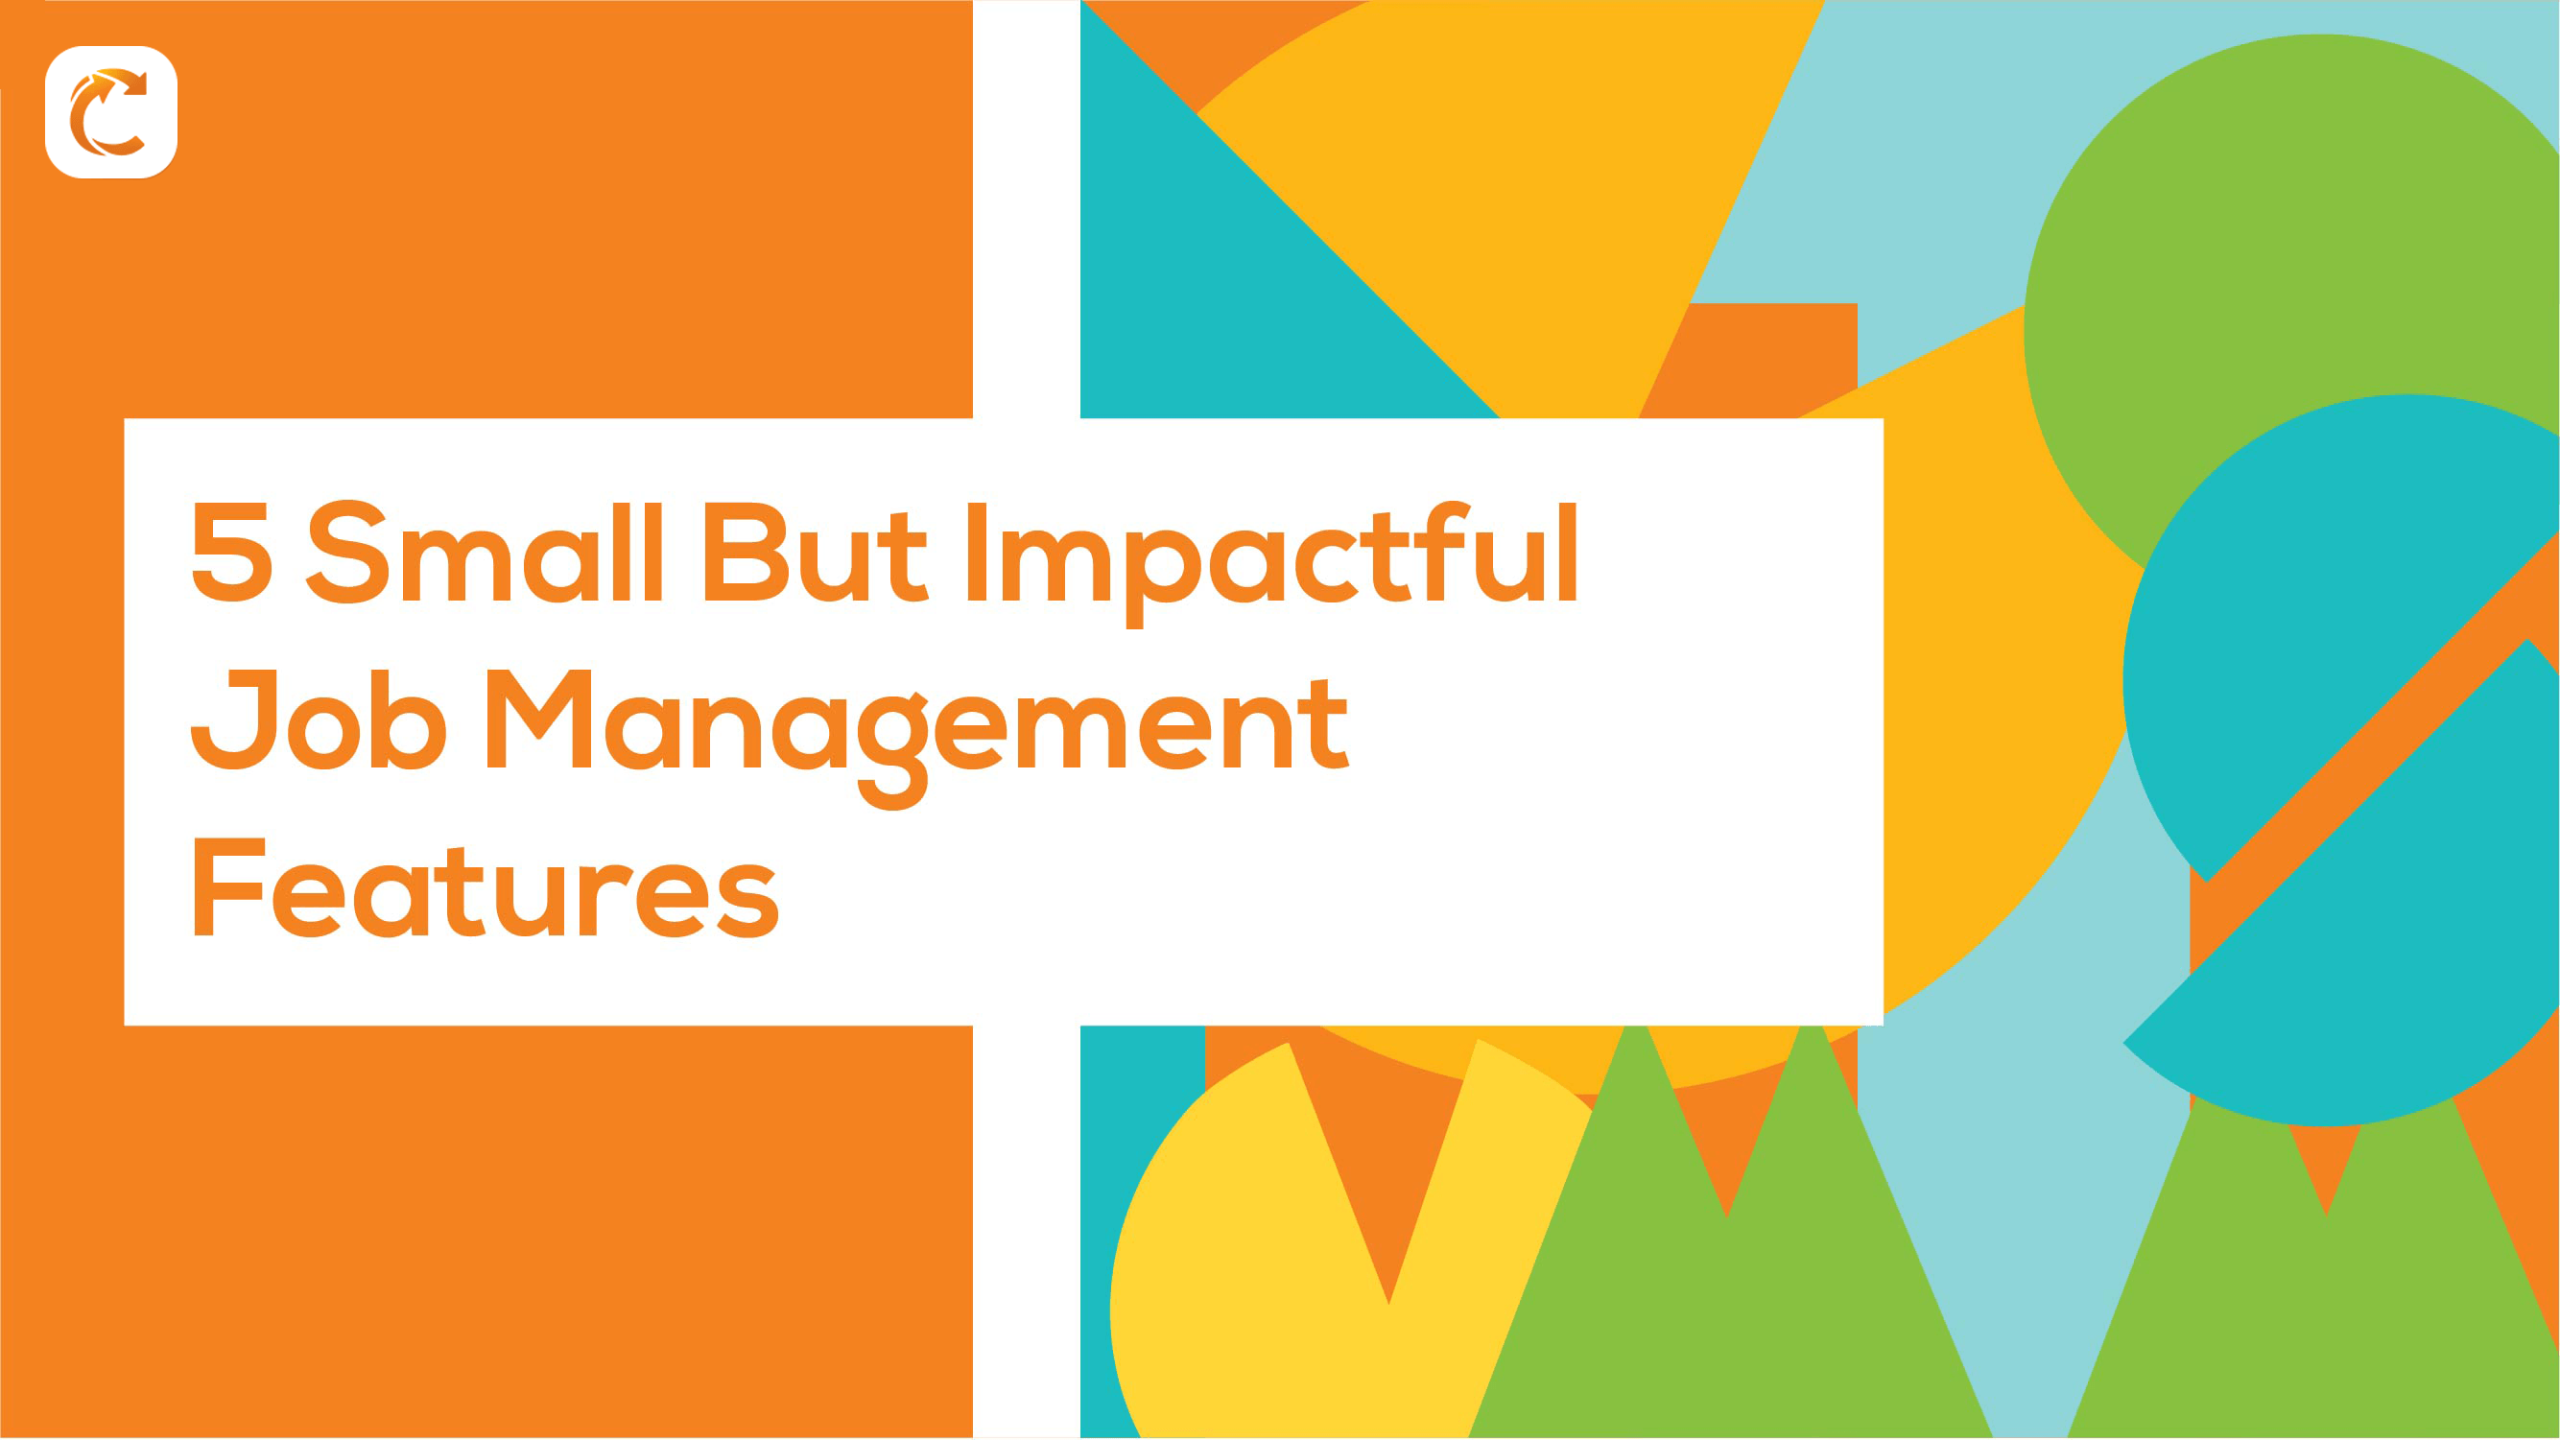 Small but impactful job management features